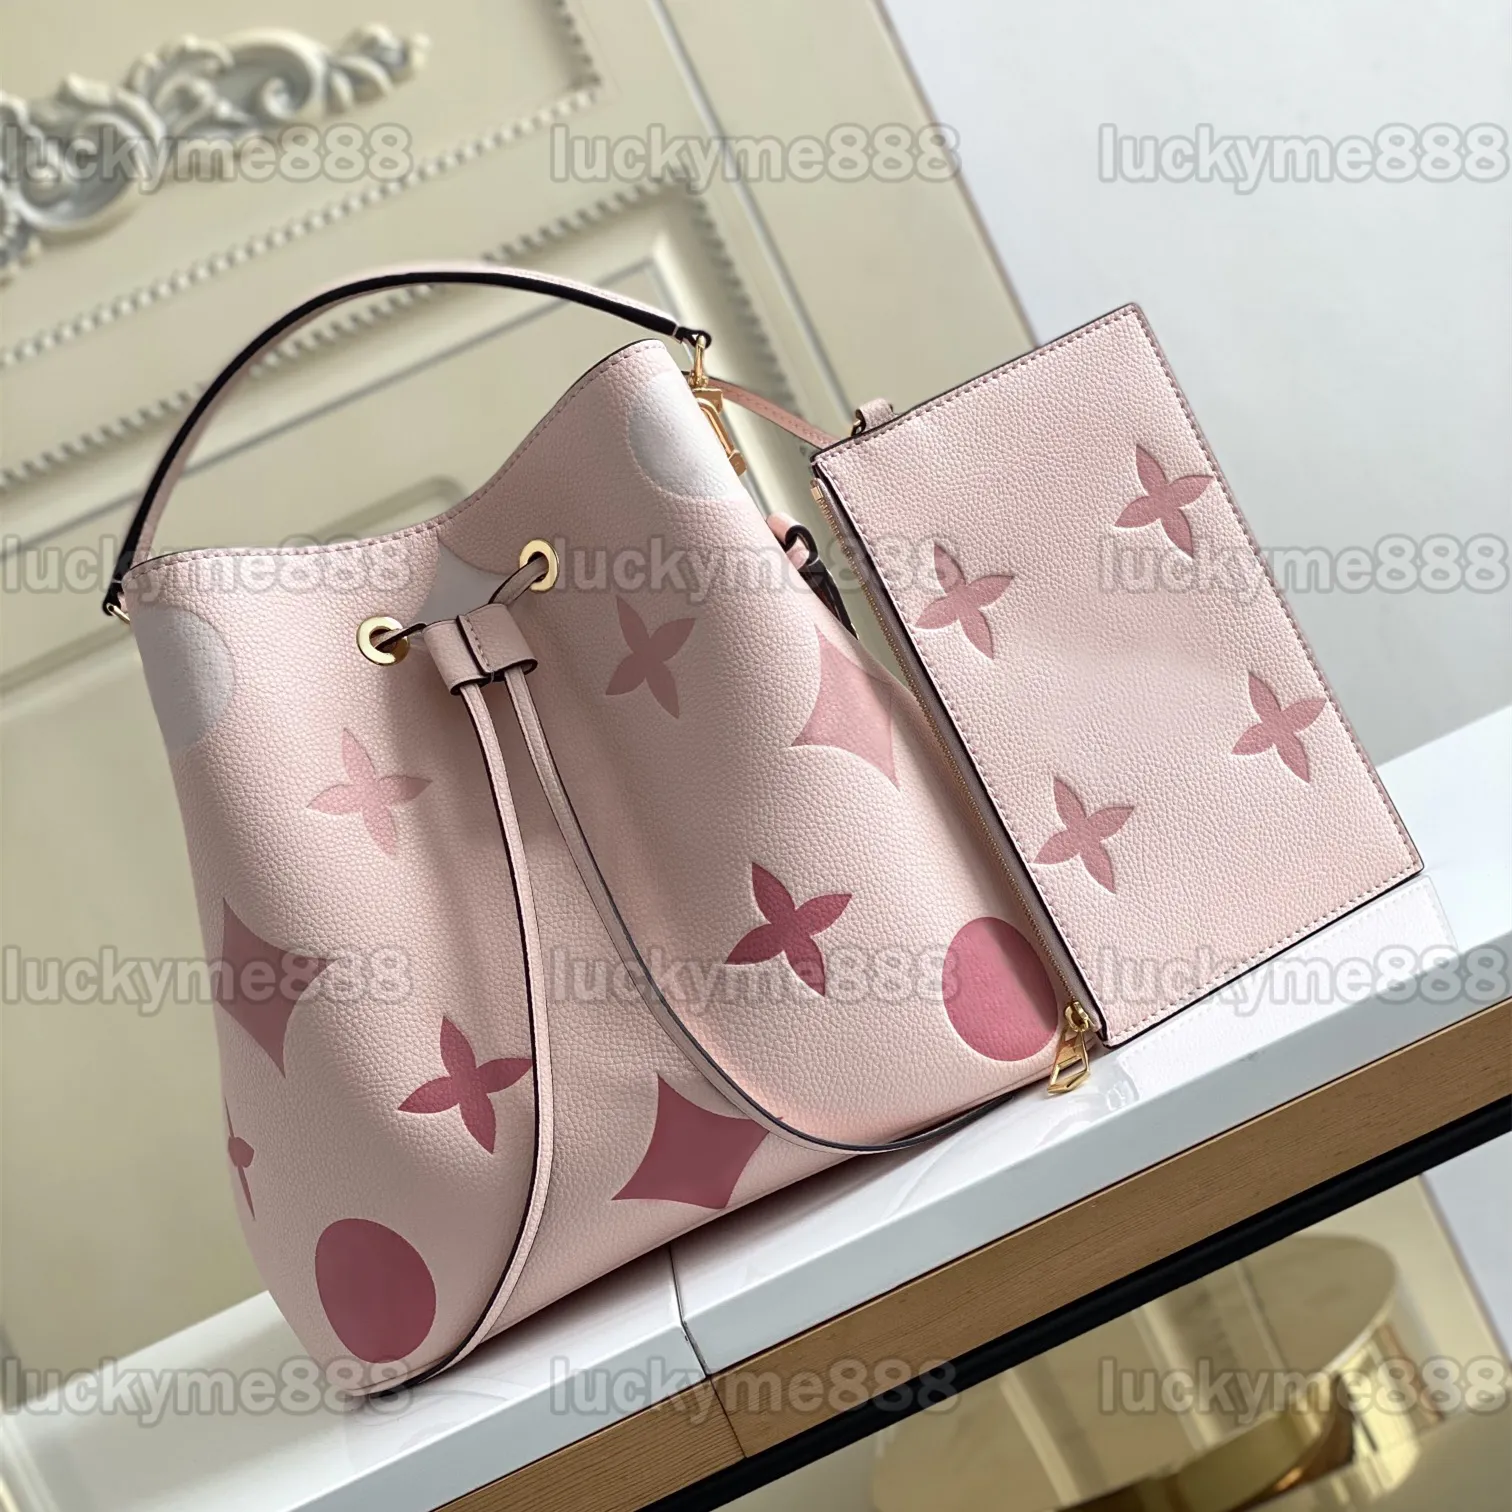 10A Mirror Quality Designers Medium Neo Bags 26cm Womens Real Leather Cowhide Bucket Luxury Embossed Handbags Purse Crossbody Shoulder Box Bags With Small Pouch